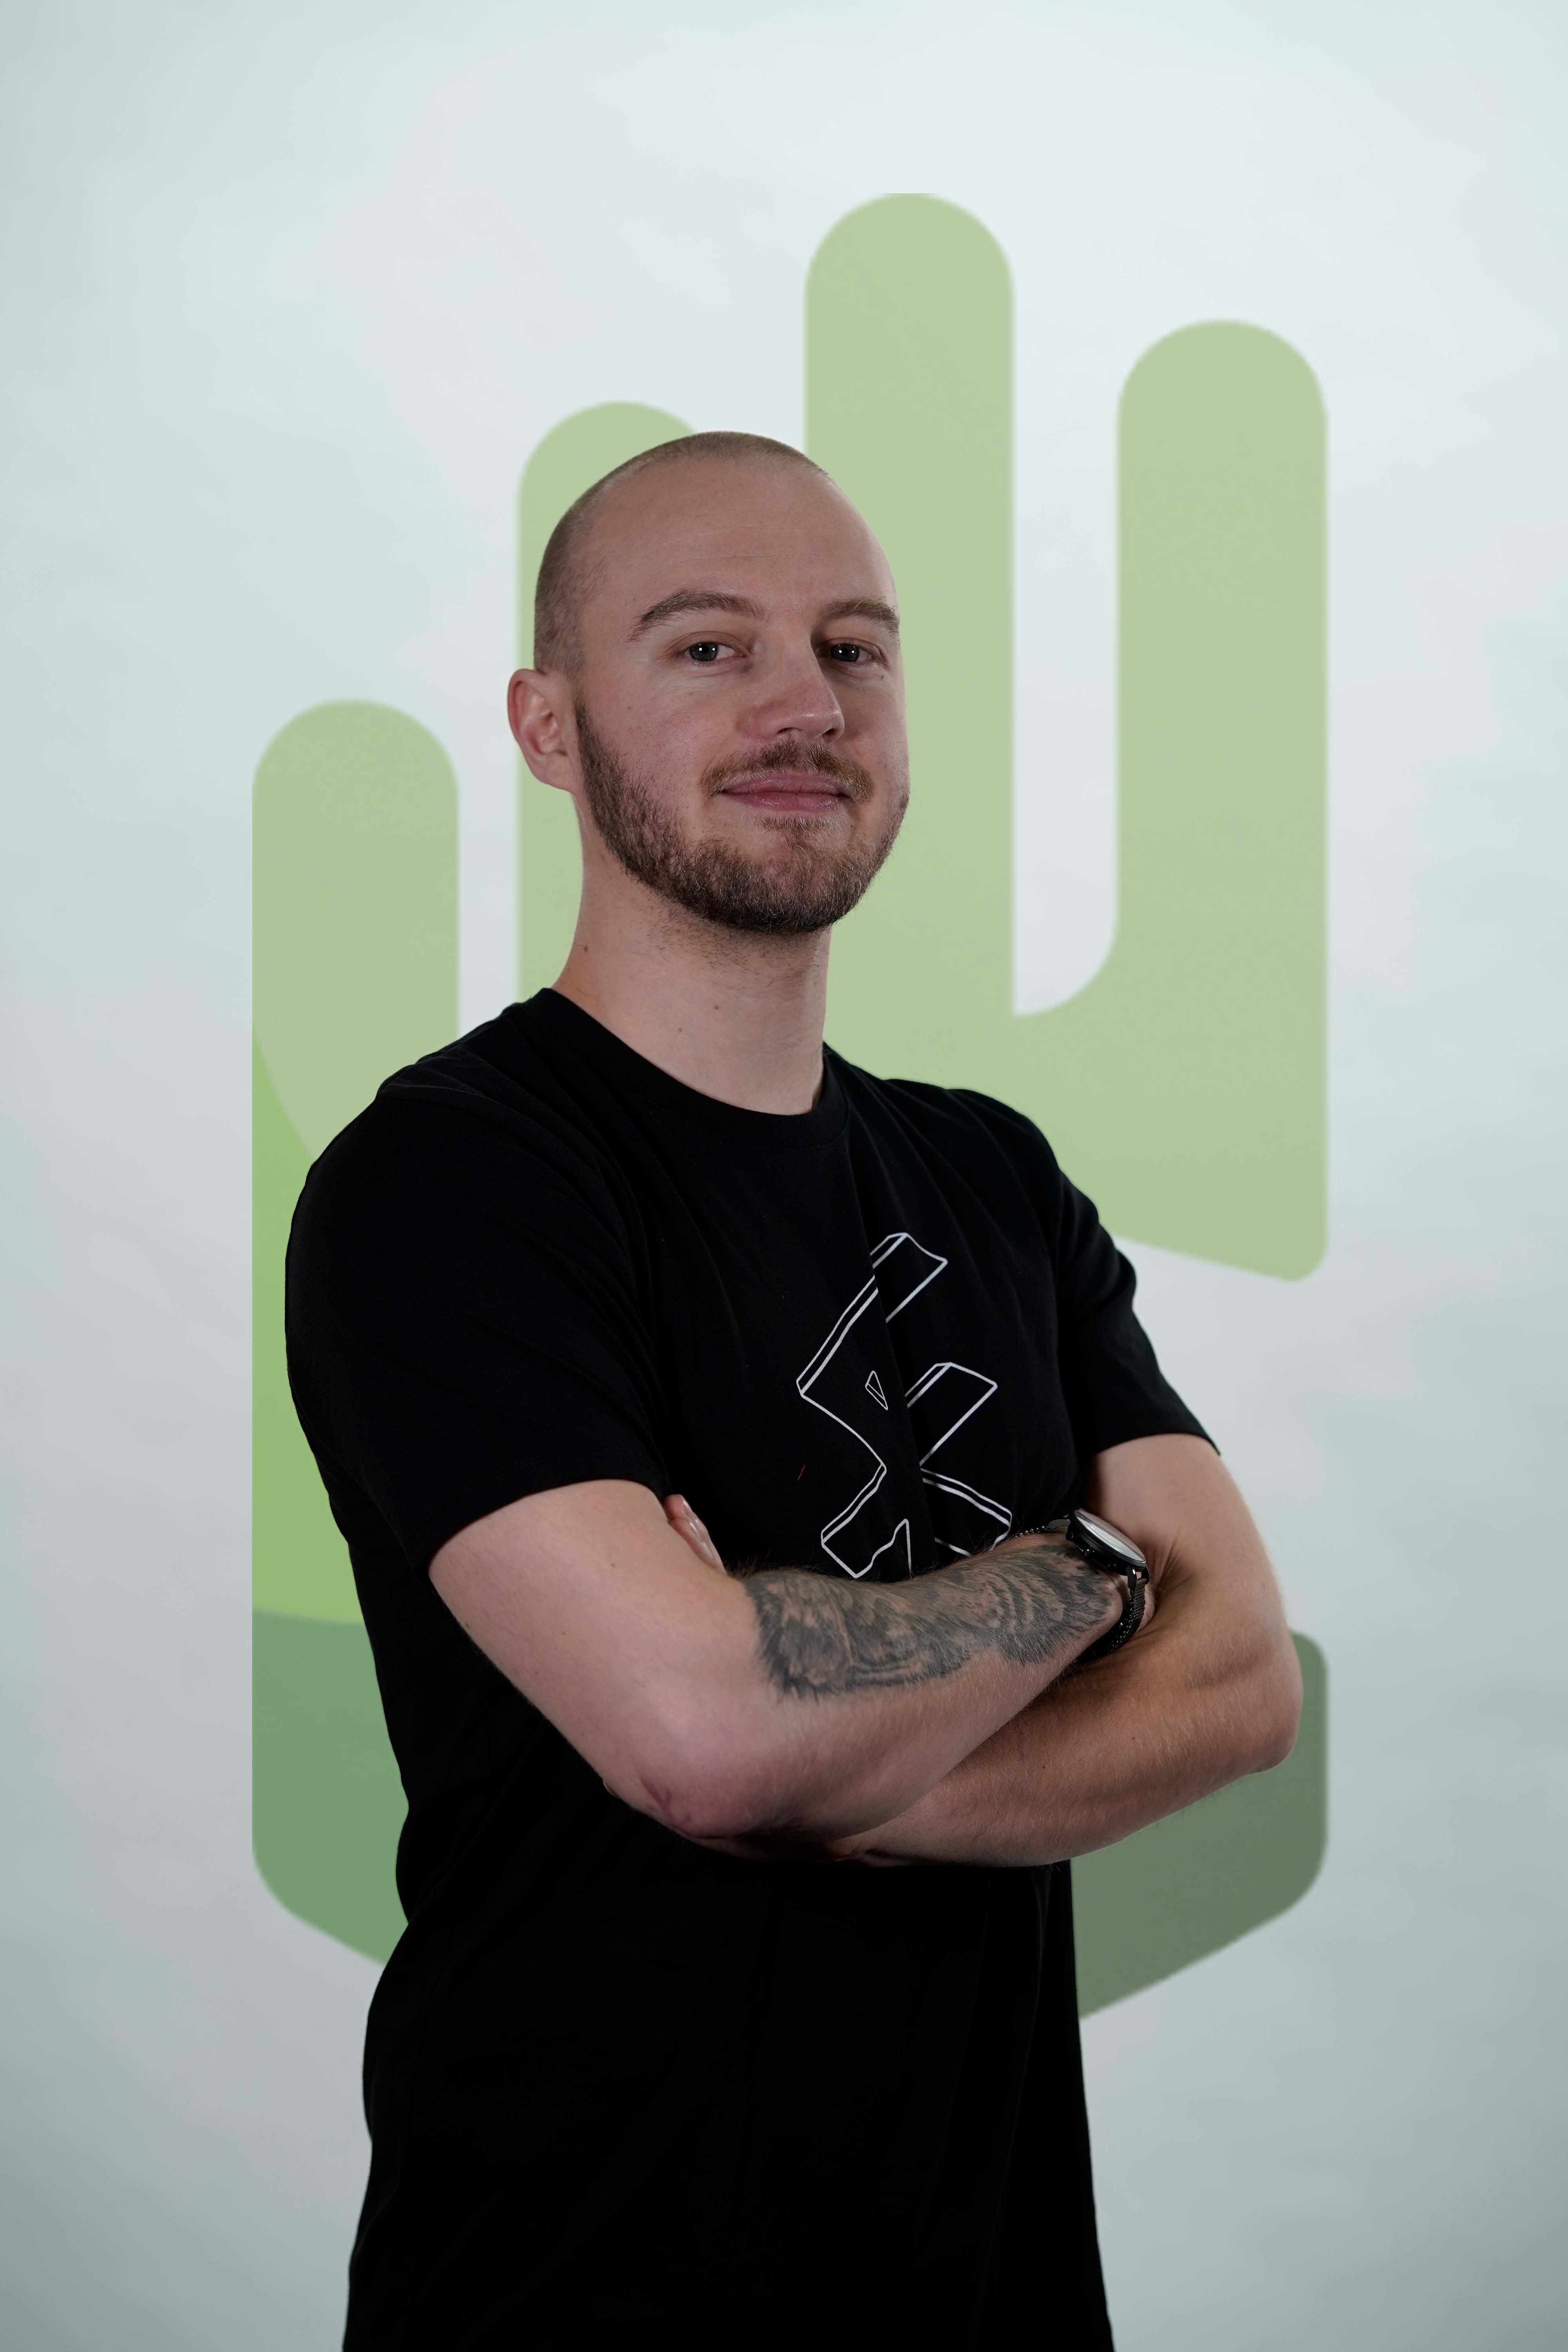 Lukas Anetsberger, CEO and Co-Founder of fivefingergames